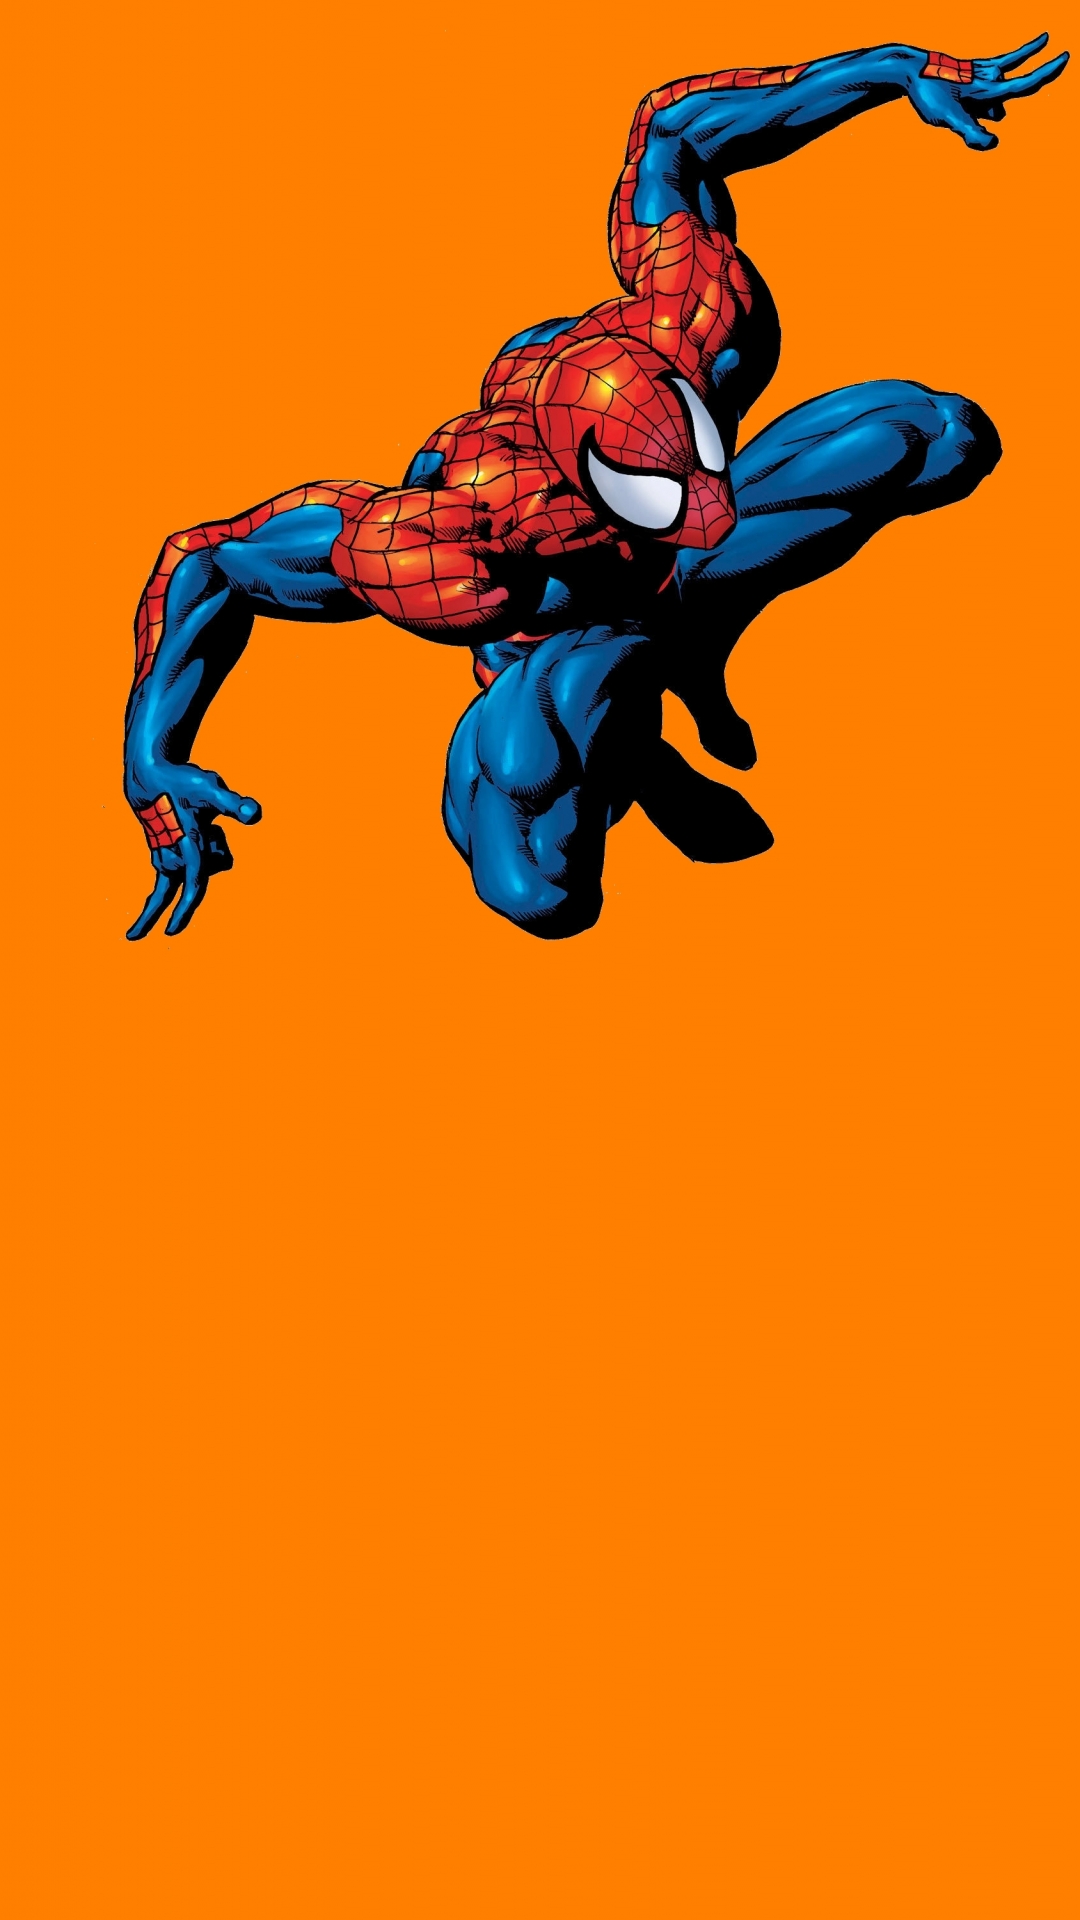 Free Download Spiderman Backgrounds for Iphone ...